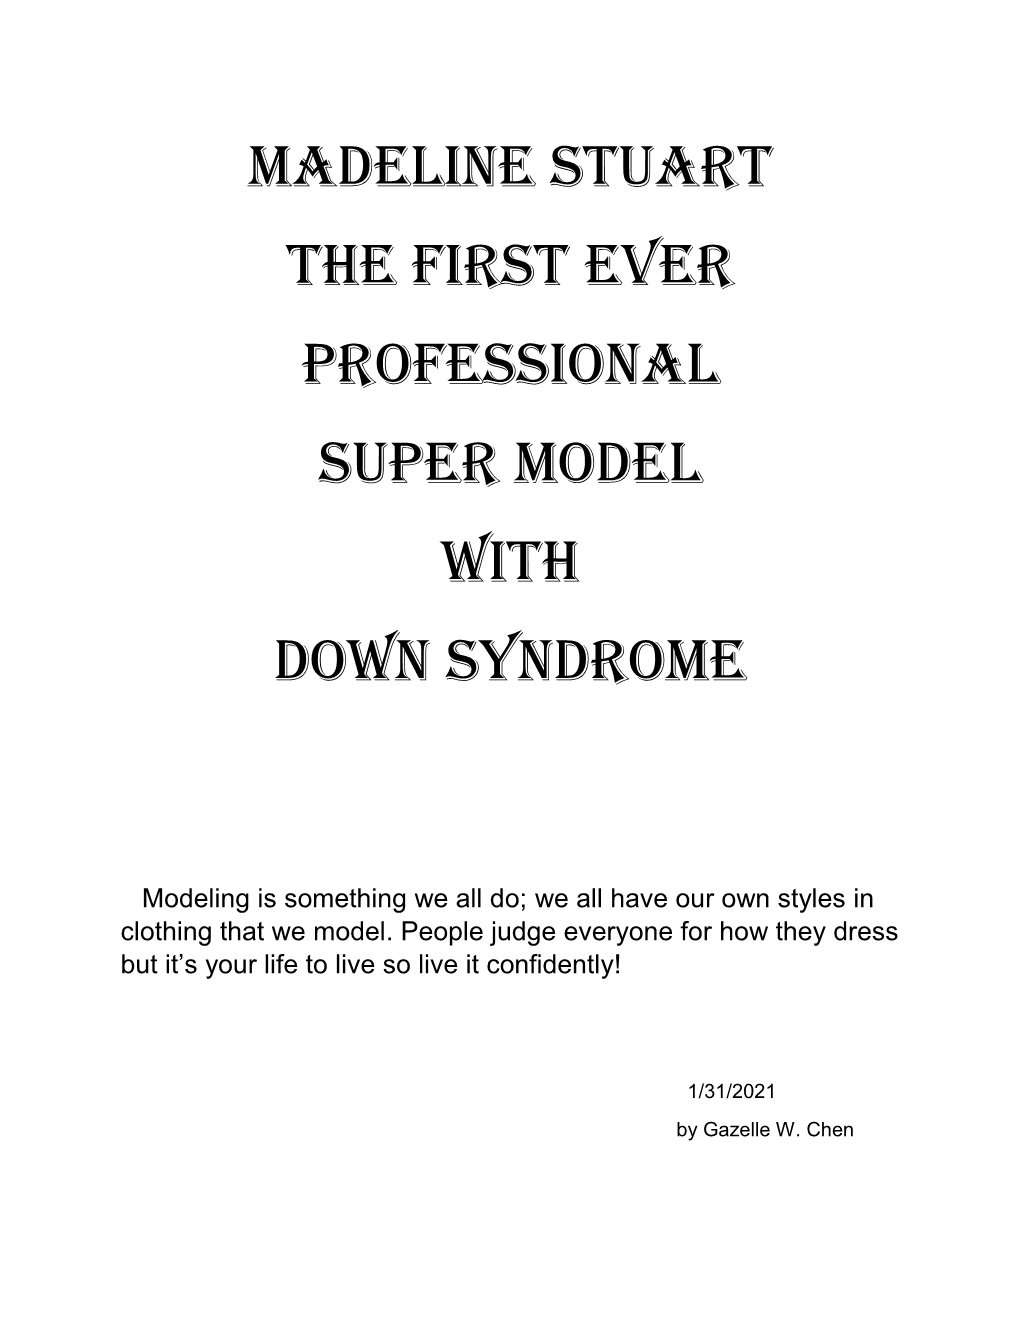 Madeline Stuart the First Ever Professional Super Model with Down Syndrome